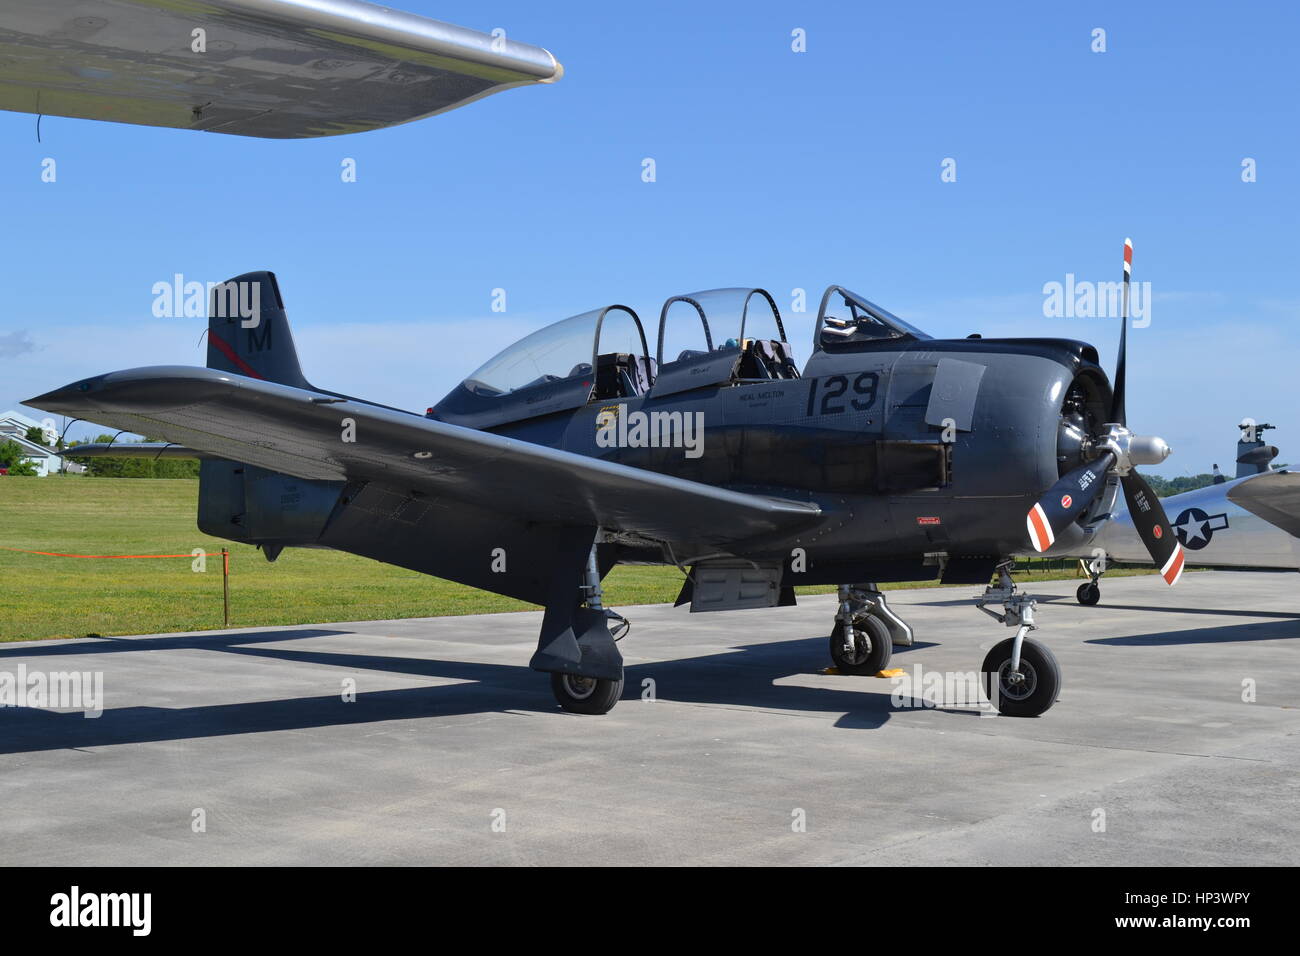 T-28 Trojan aircraft, Tennessee Museum of Aviation Stock Photo